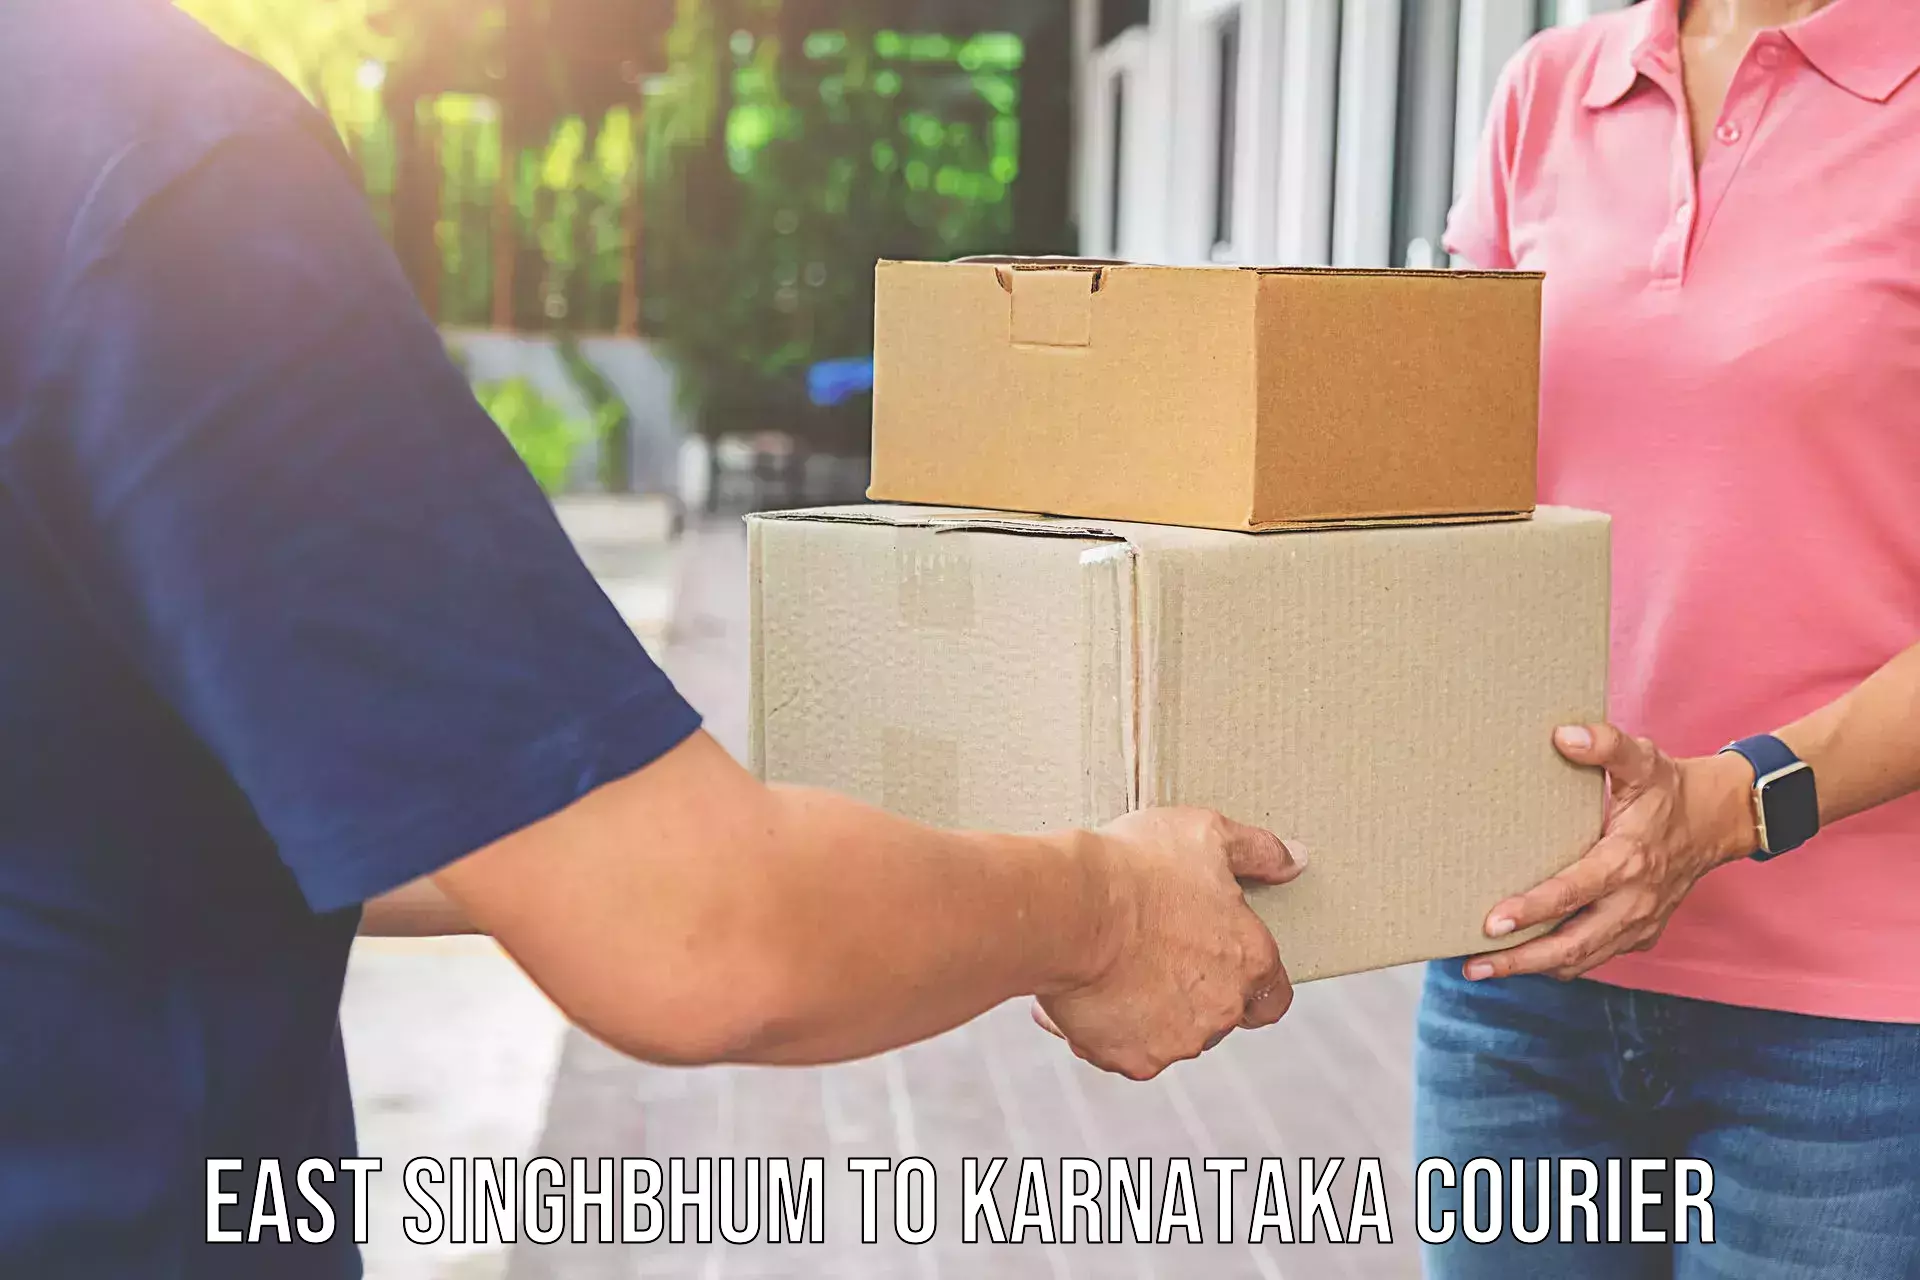 Professional relocation services East Singhbhum to Gundlupete